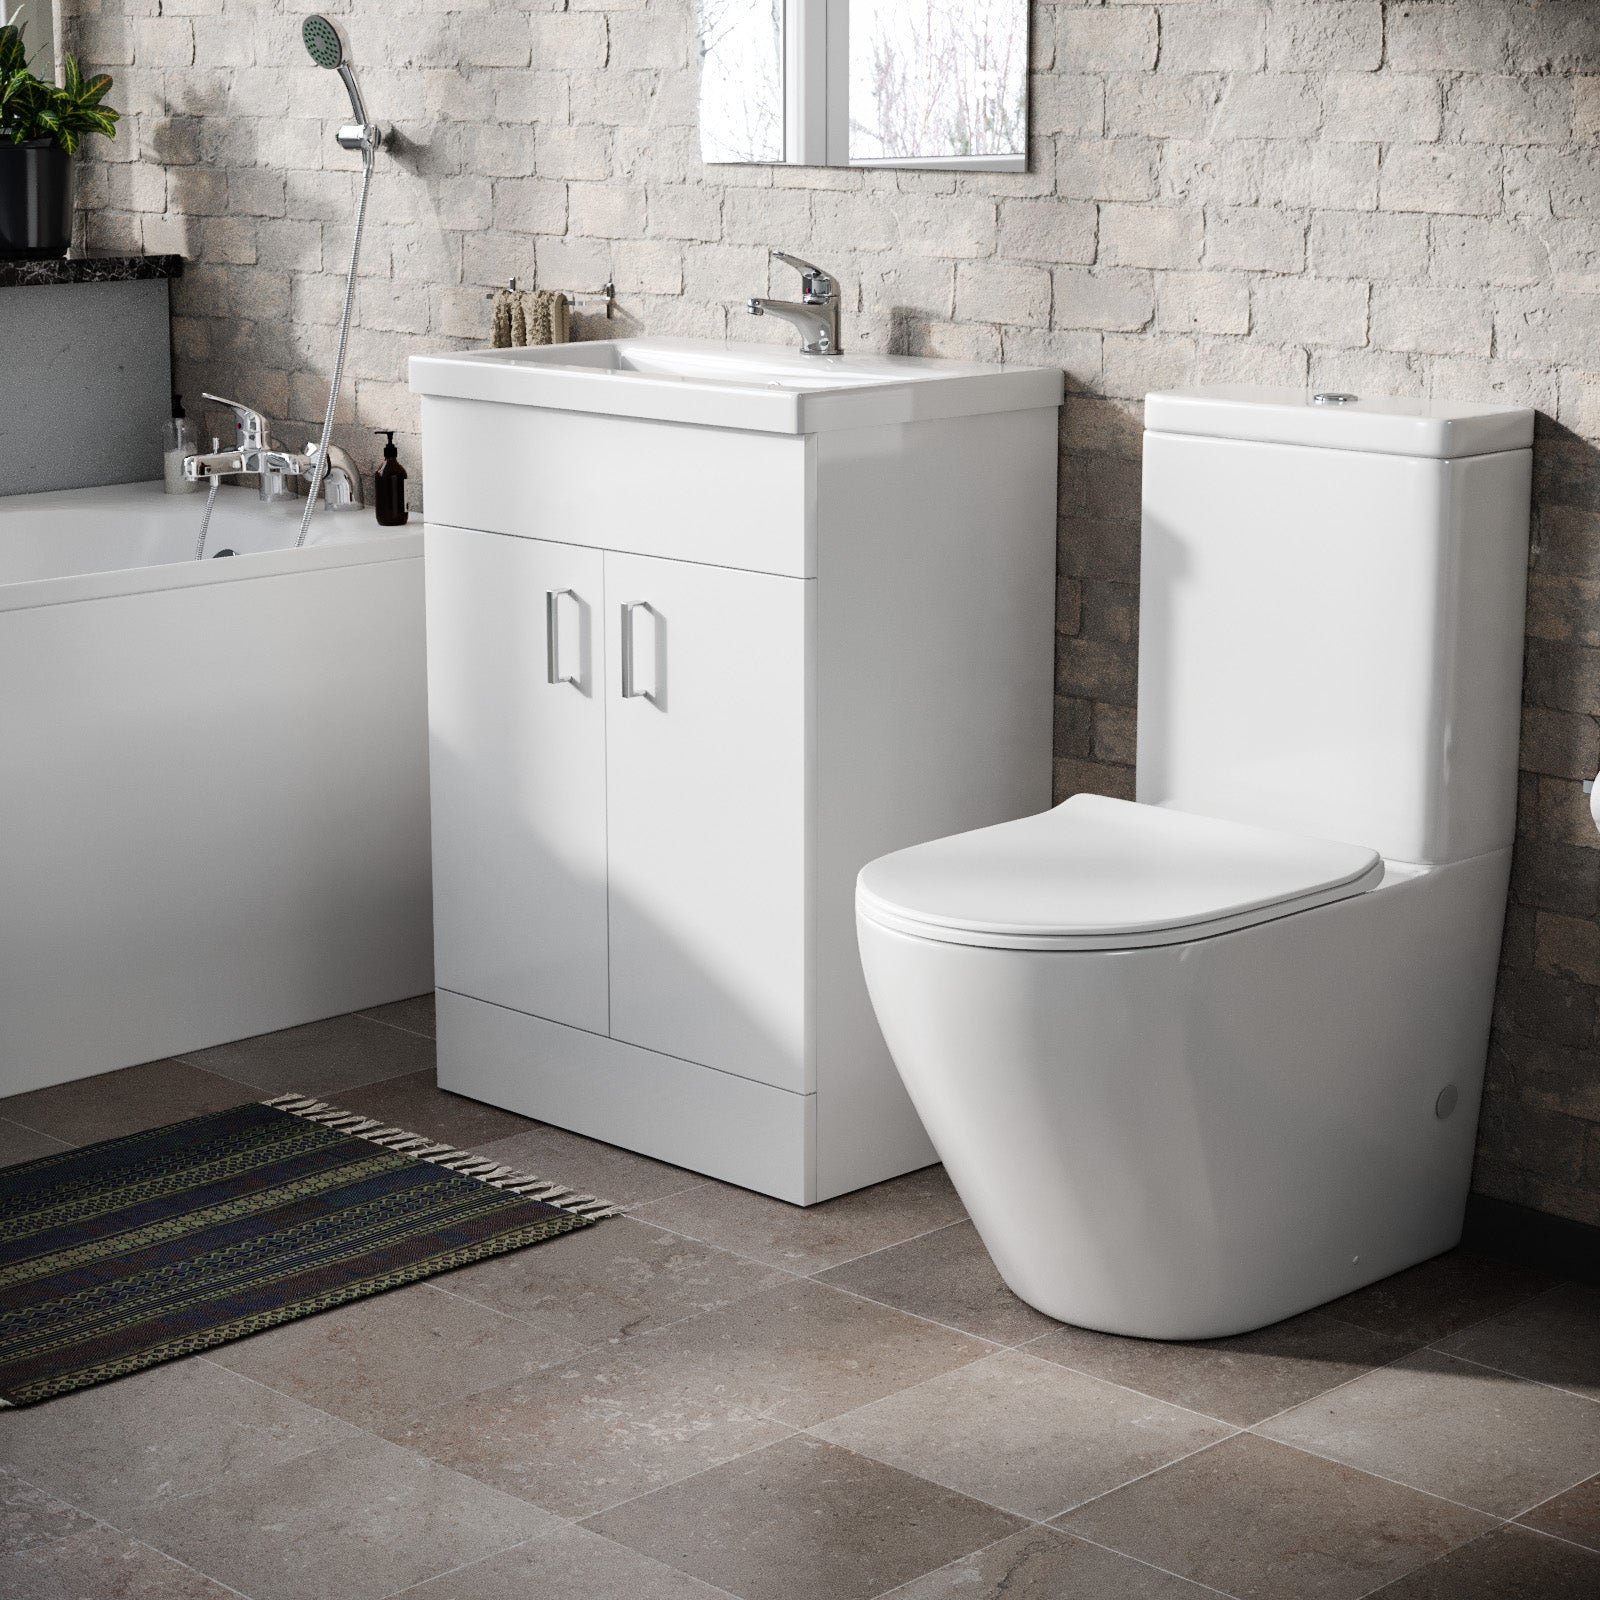 Nanuya Bath Suite with Basin Vanity Unit and Rimless Close Coupled Toilet